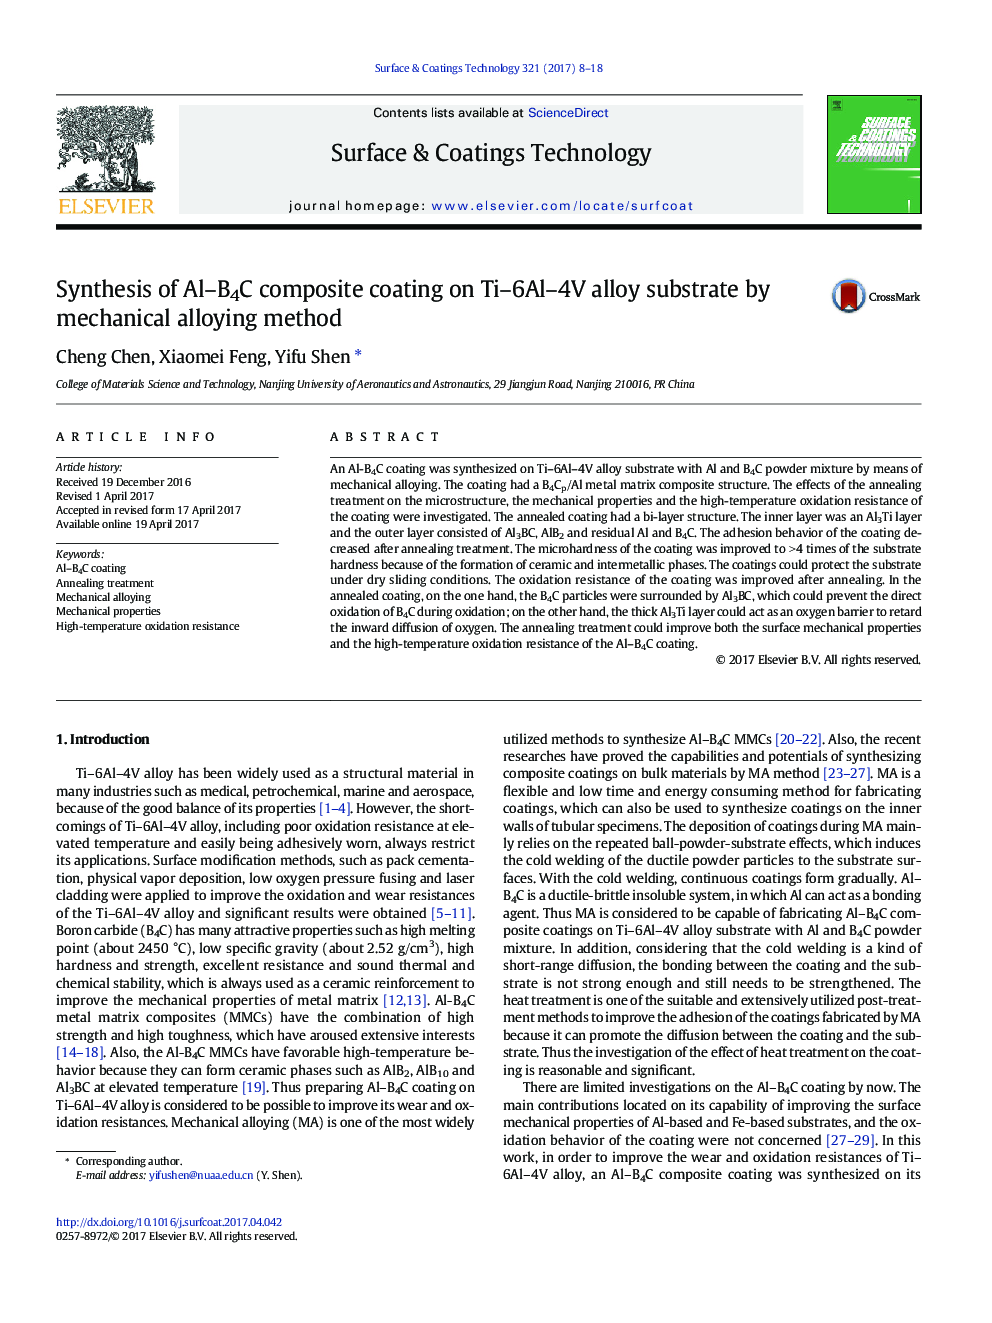 Synthesis of Al-B4C composite coating on Ti-6Al-4V alloy substrate by mechanical alloying method